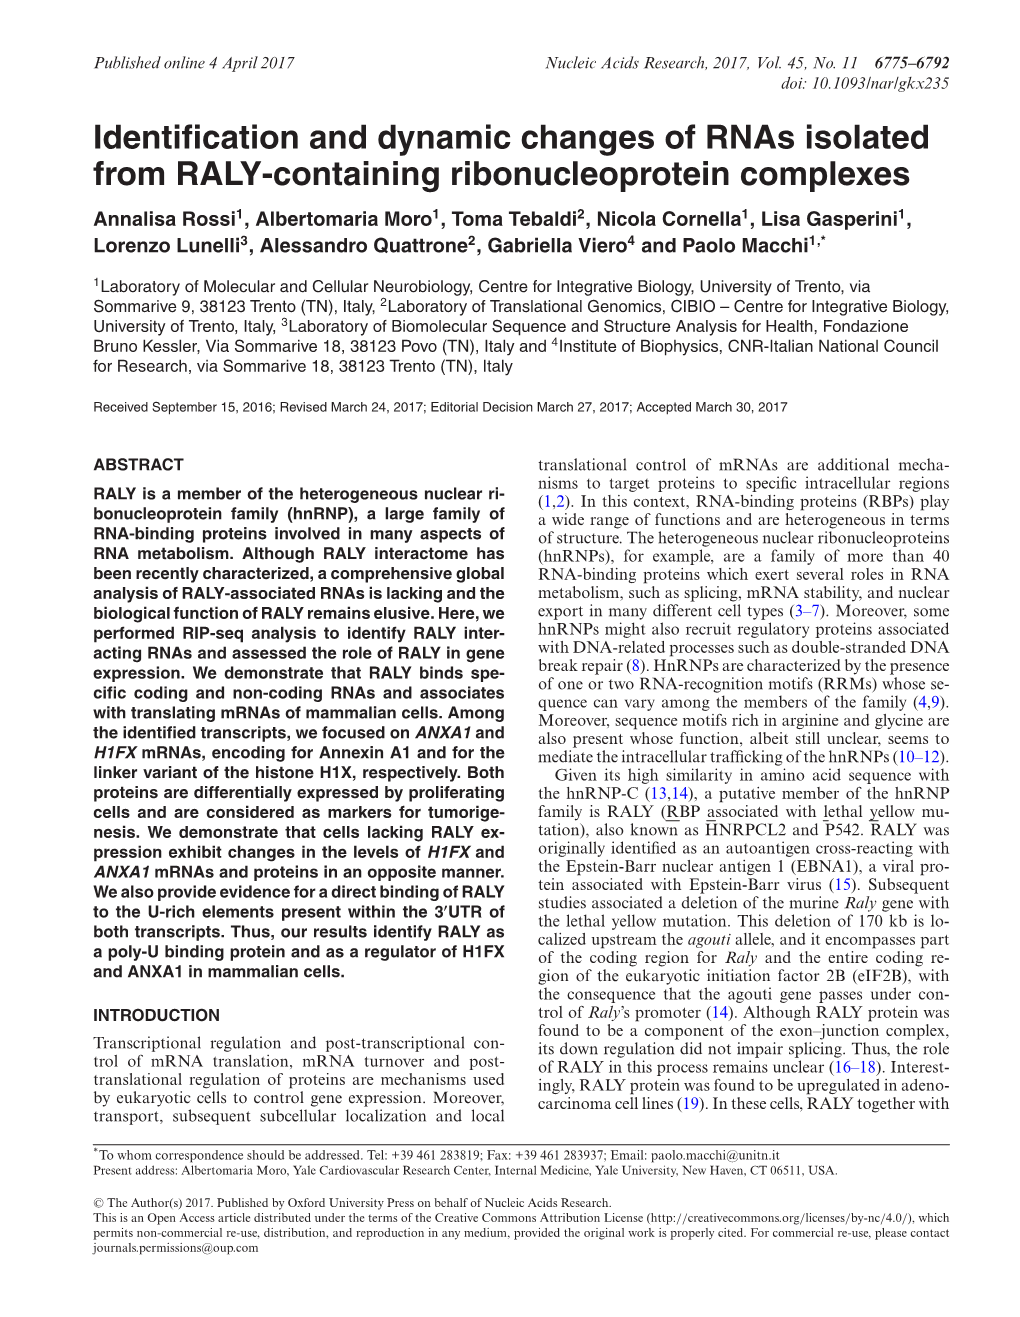 Identification and Dynamic Changes of Rnas Isolated from RALY